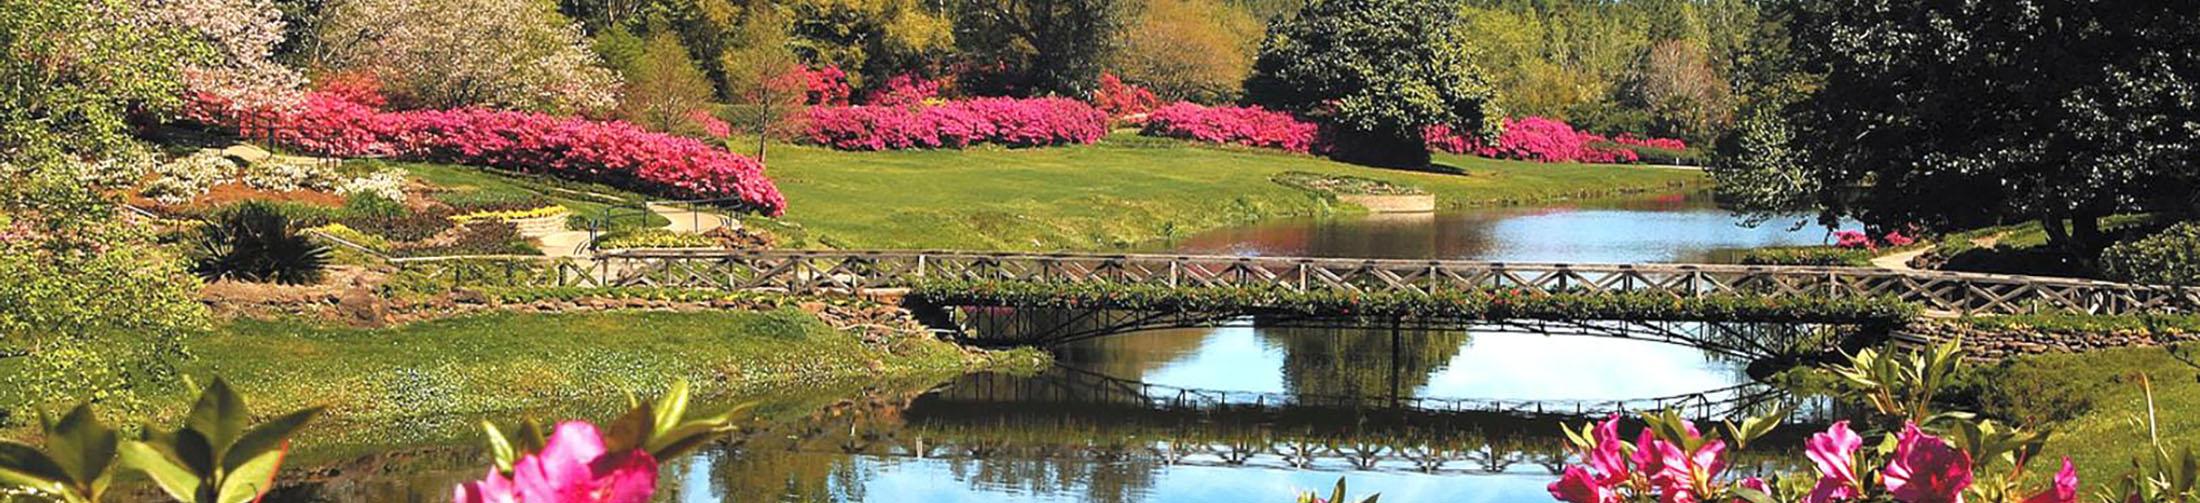 Bellingrath Gardens, an attraction located near our gulf coast college.